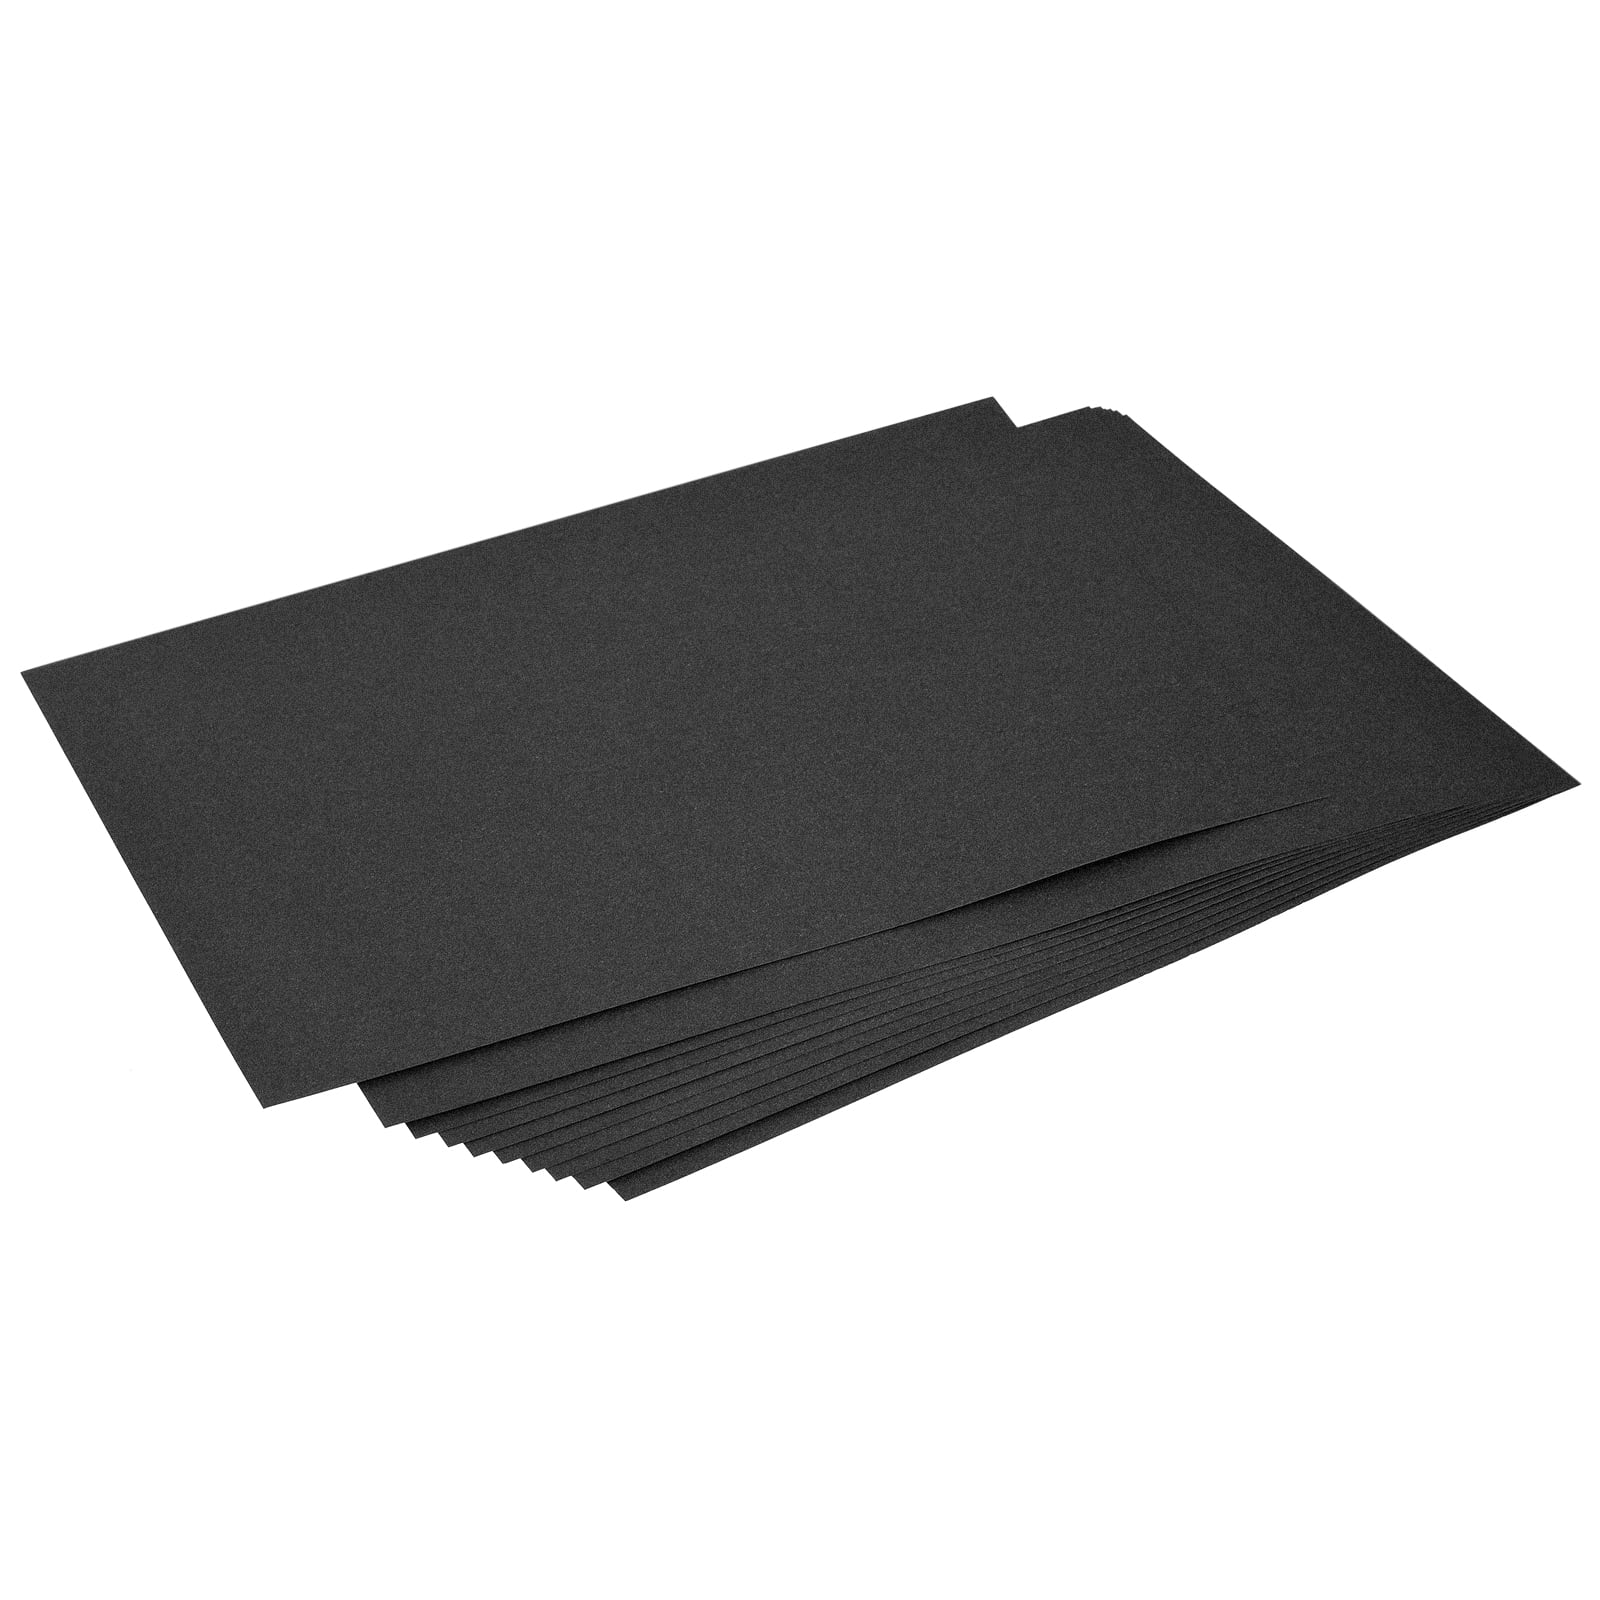  50 Sheets Black Cardstock 8.5 x 11, 250gsm/92lb Thick